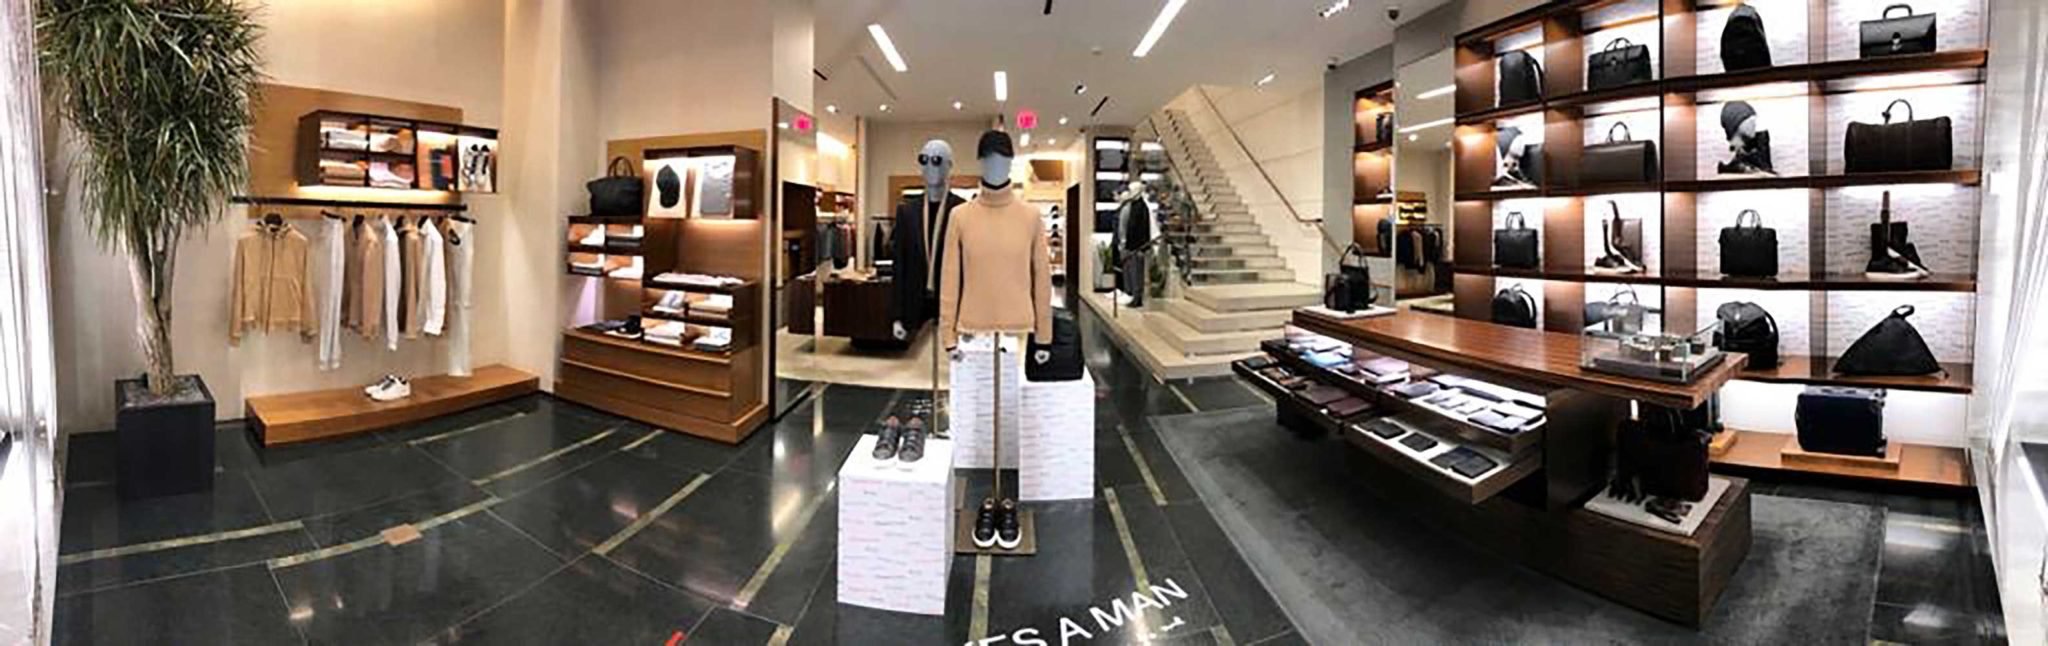 Zegna Opens a Global Store on Rodeo - DuJour